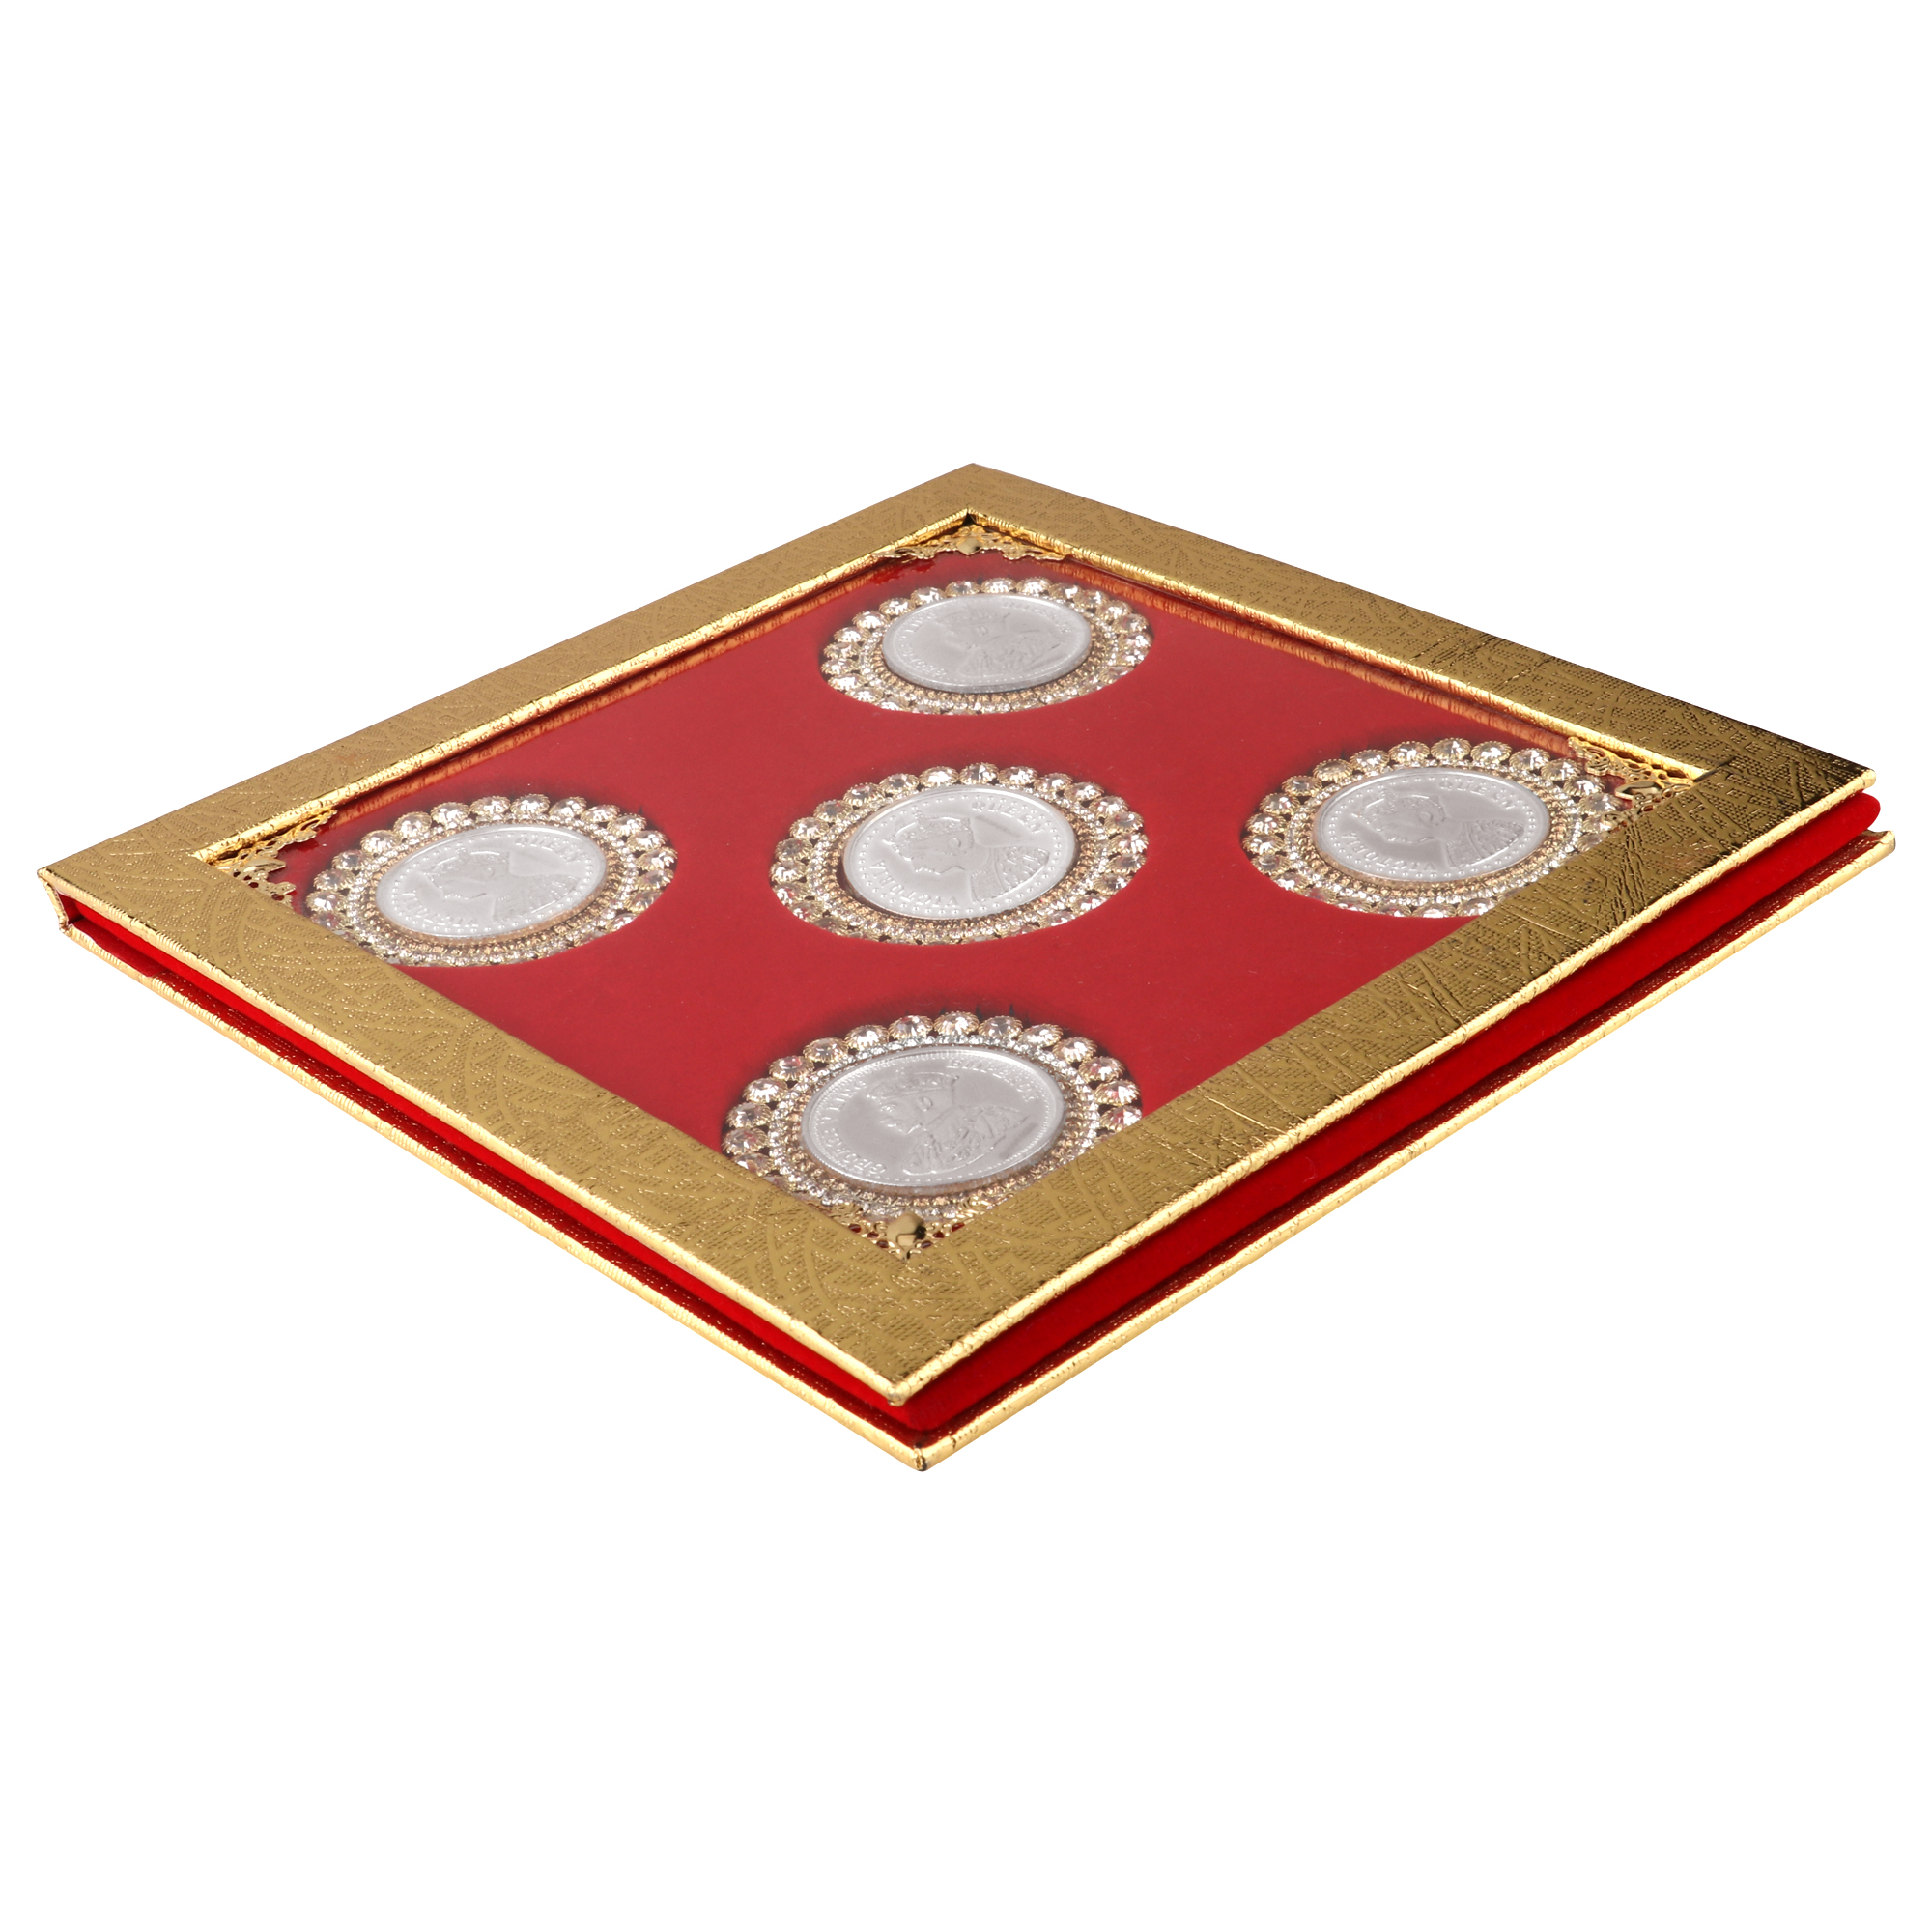 Silver Coin 10gm x5 in Red Golden Ring Packing by Osasbazaar Main